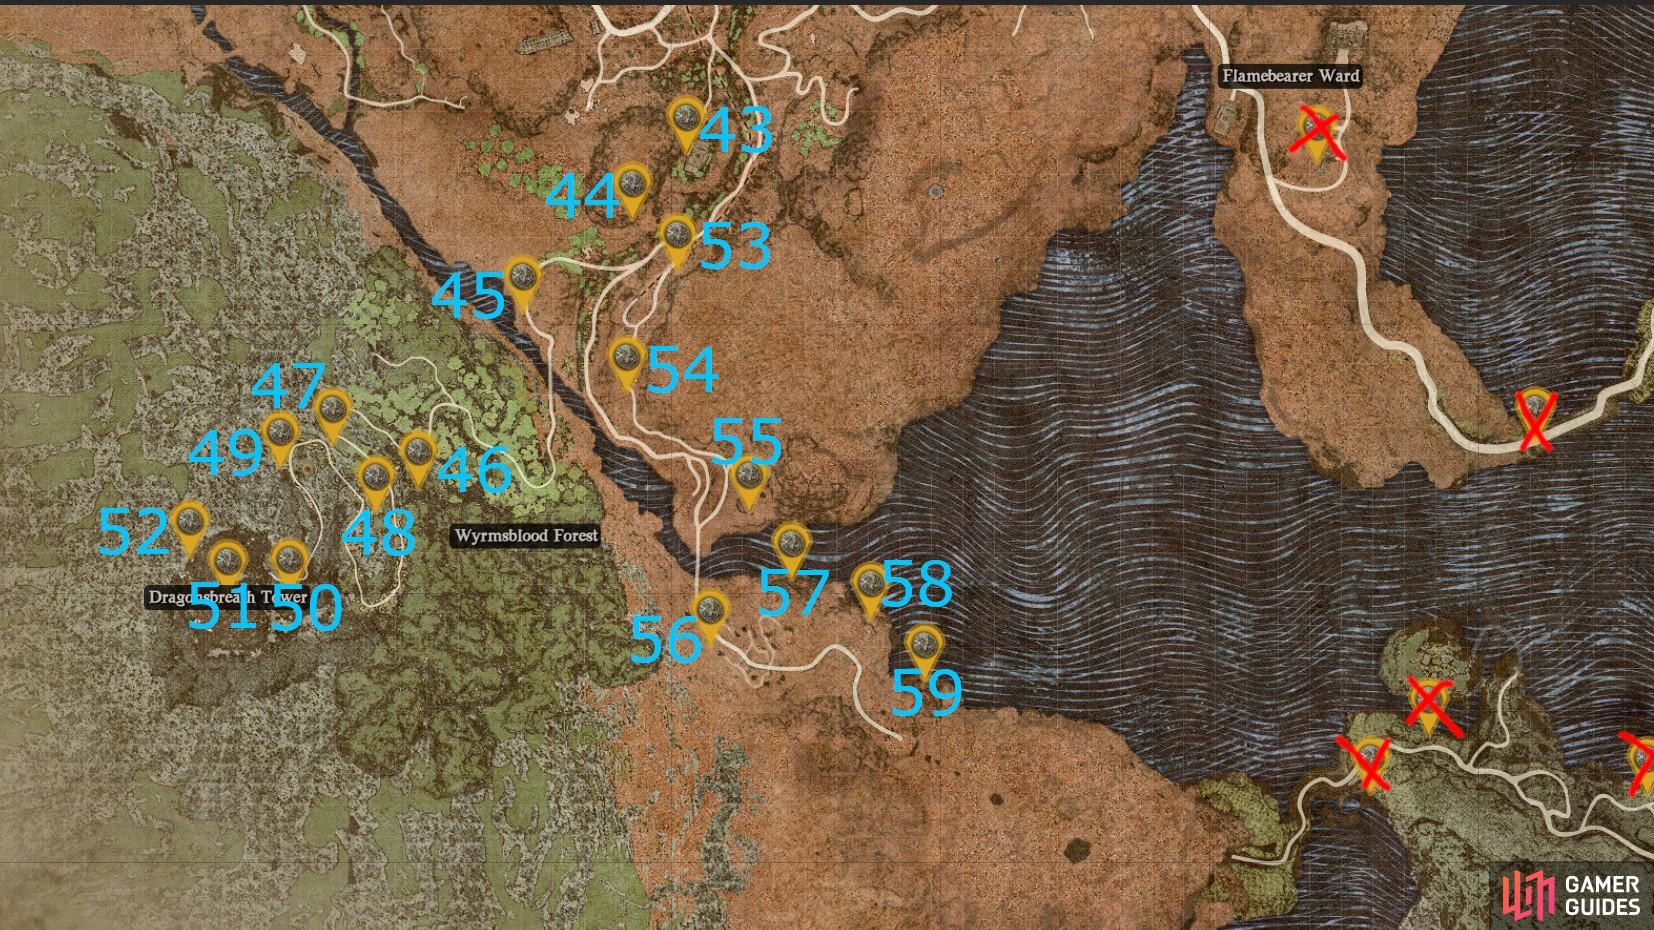 The final grind for Battahl requires journey into very dense enemy areas to claim the remaining Seeker’s Token locations in Dragon’s Dogma 2.